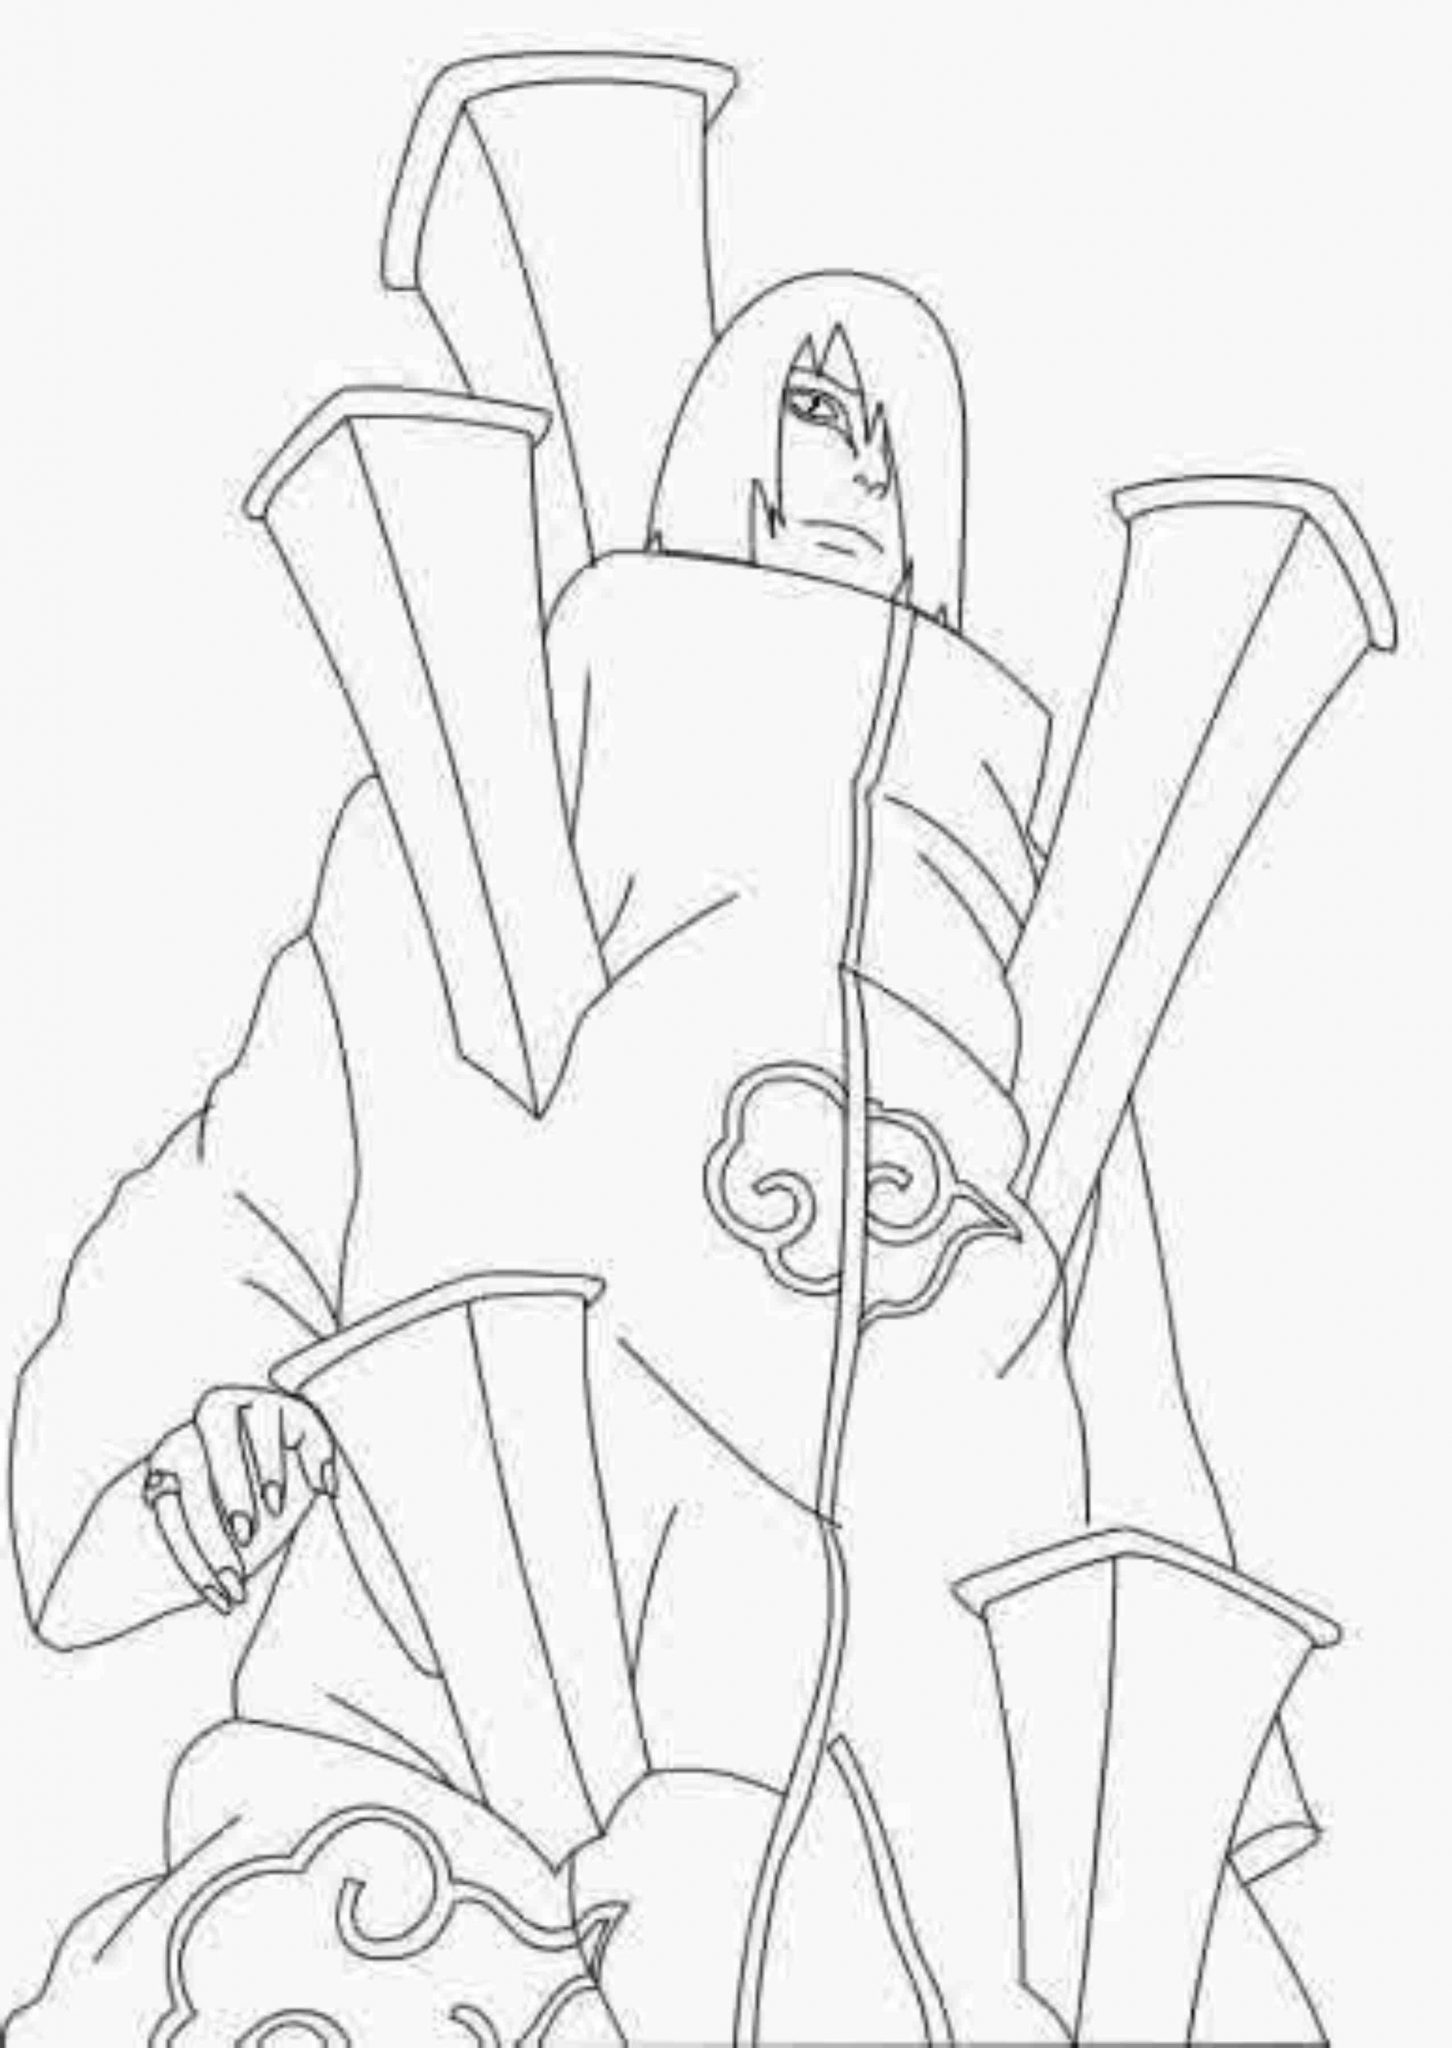  naruto  coloring  pages akatsuki  BestAppsForKids com